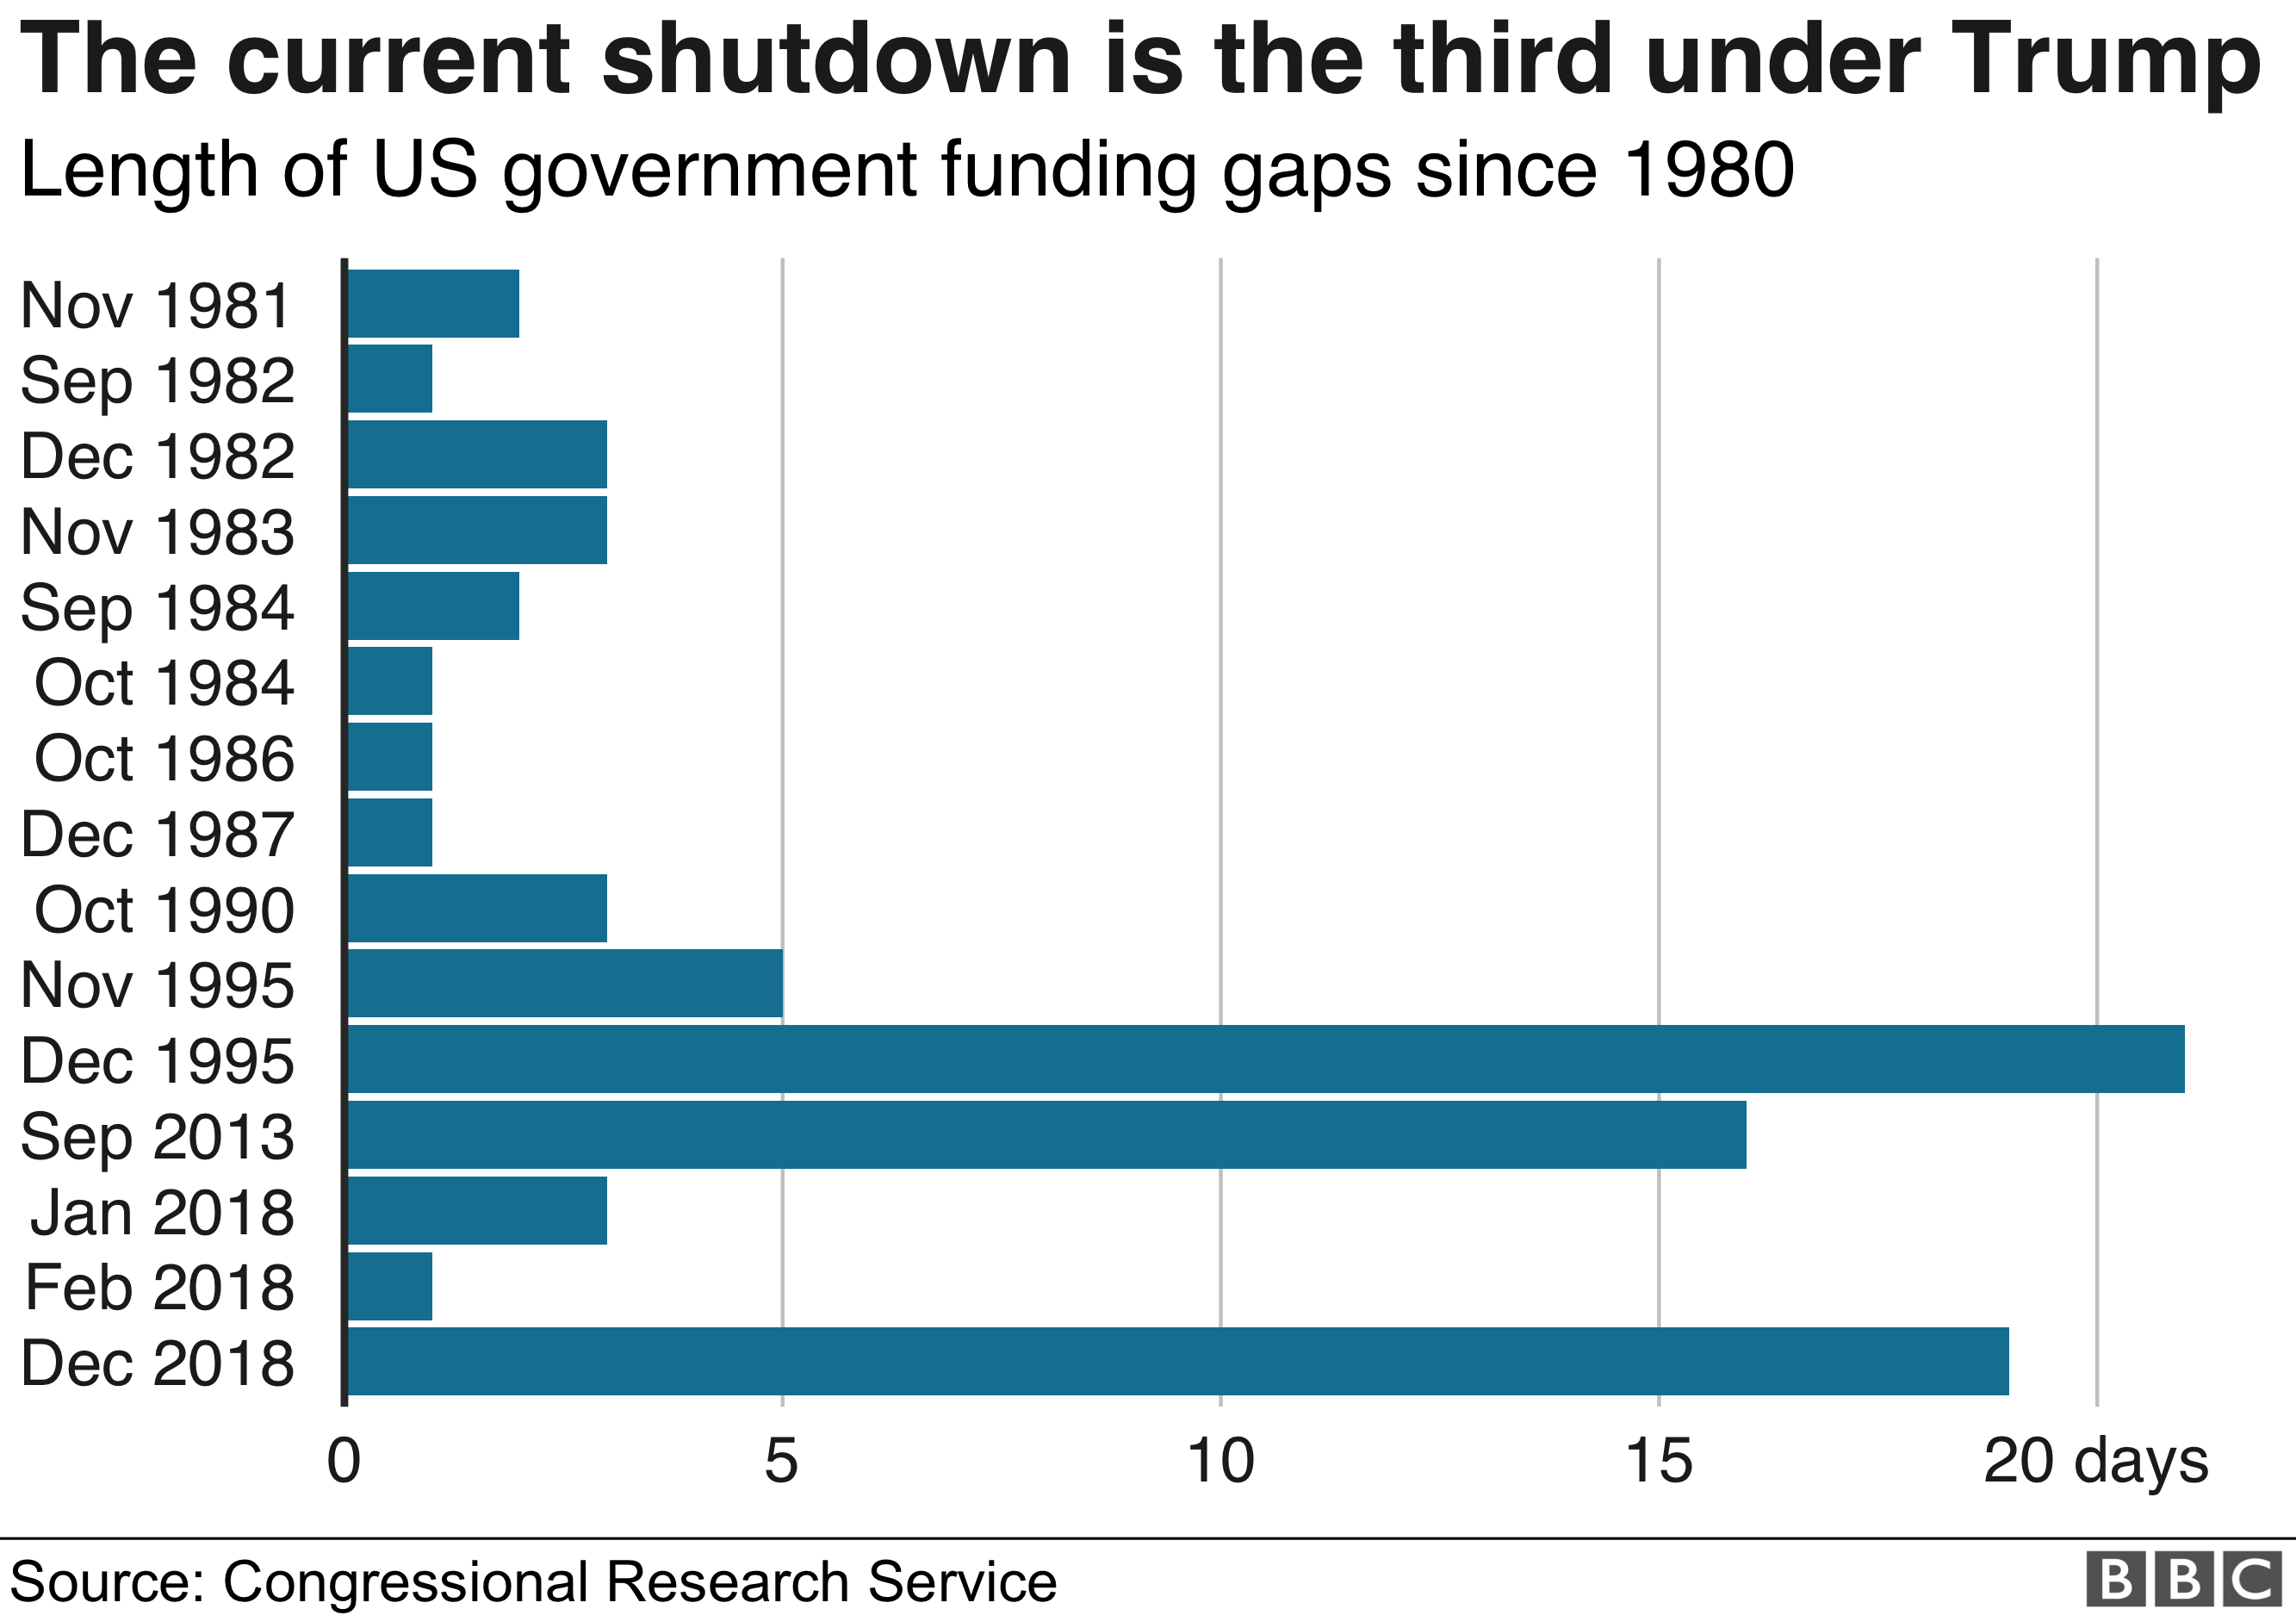 Chart showing the length of government shutdowns since 1980. The current shutdown is the second longest in that time period.